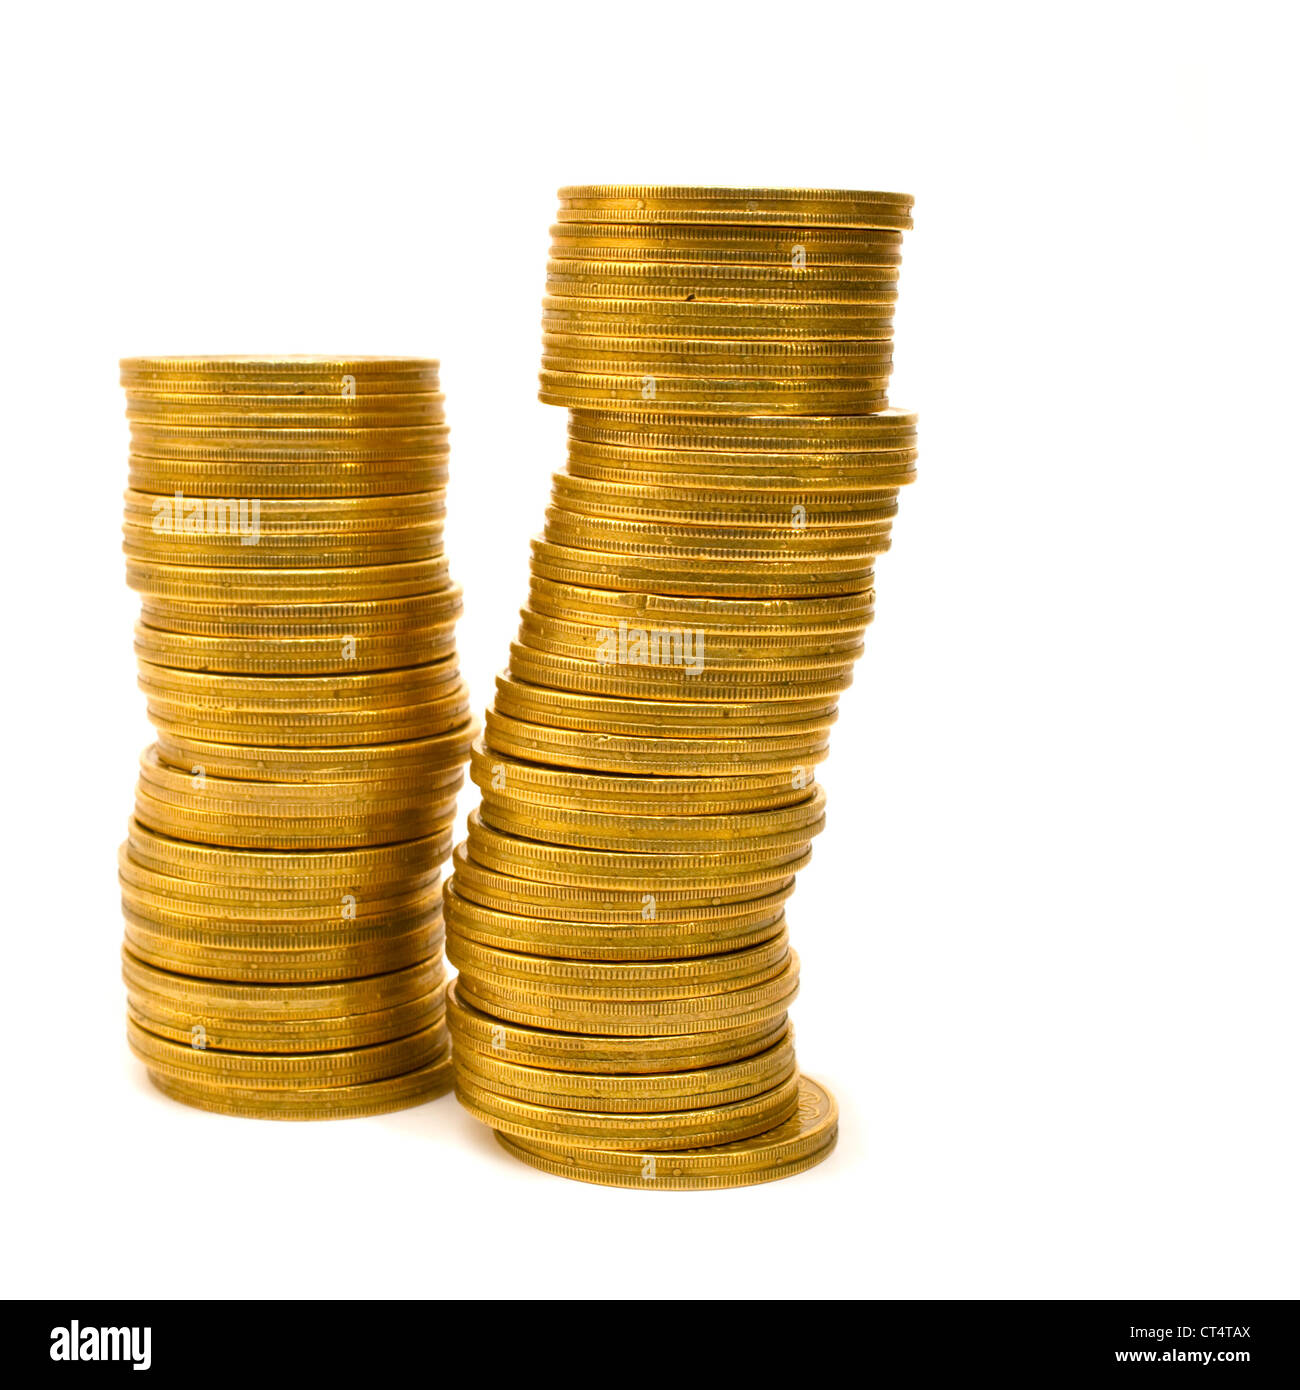 Two stacked columns of New Zealand two dollar coins on white background with small soft shadow at base. Stock Photo